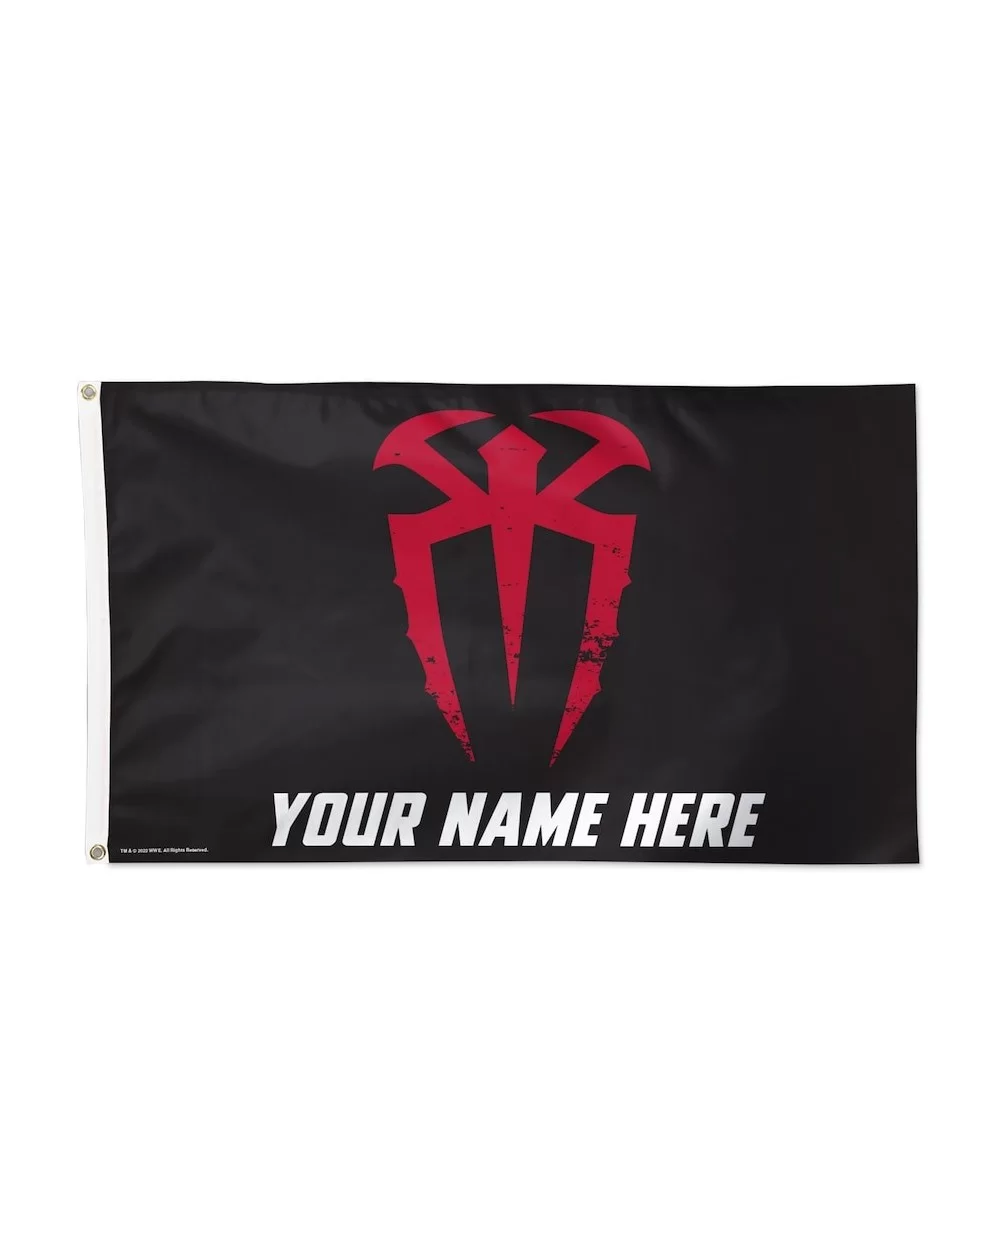 WinCraft Roman Reigns 3' x 5' One-Sided Deluxe Personalized Flag $18.80 Home & Office